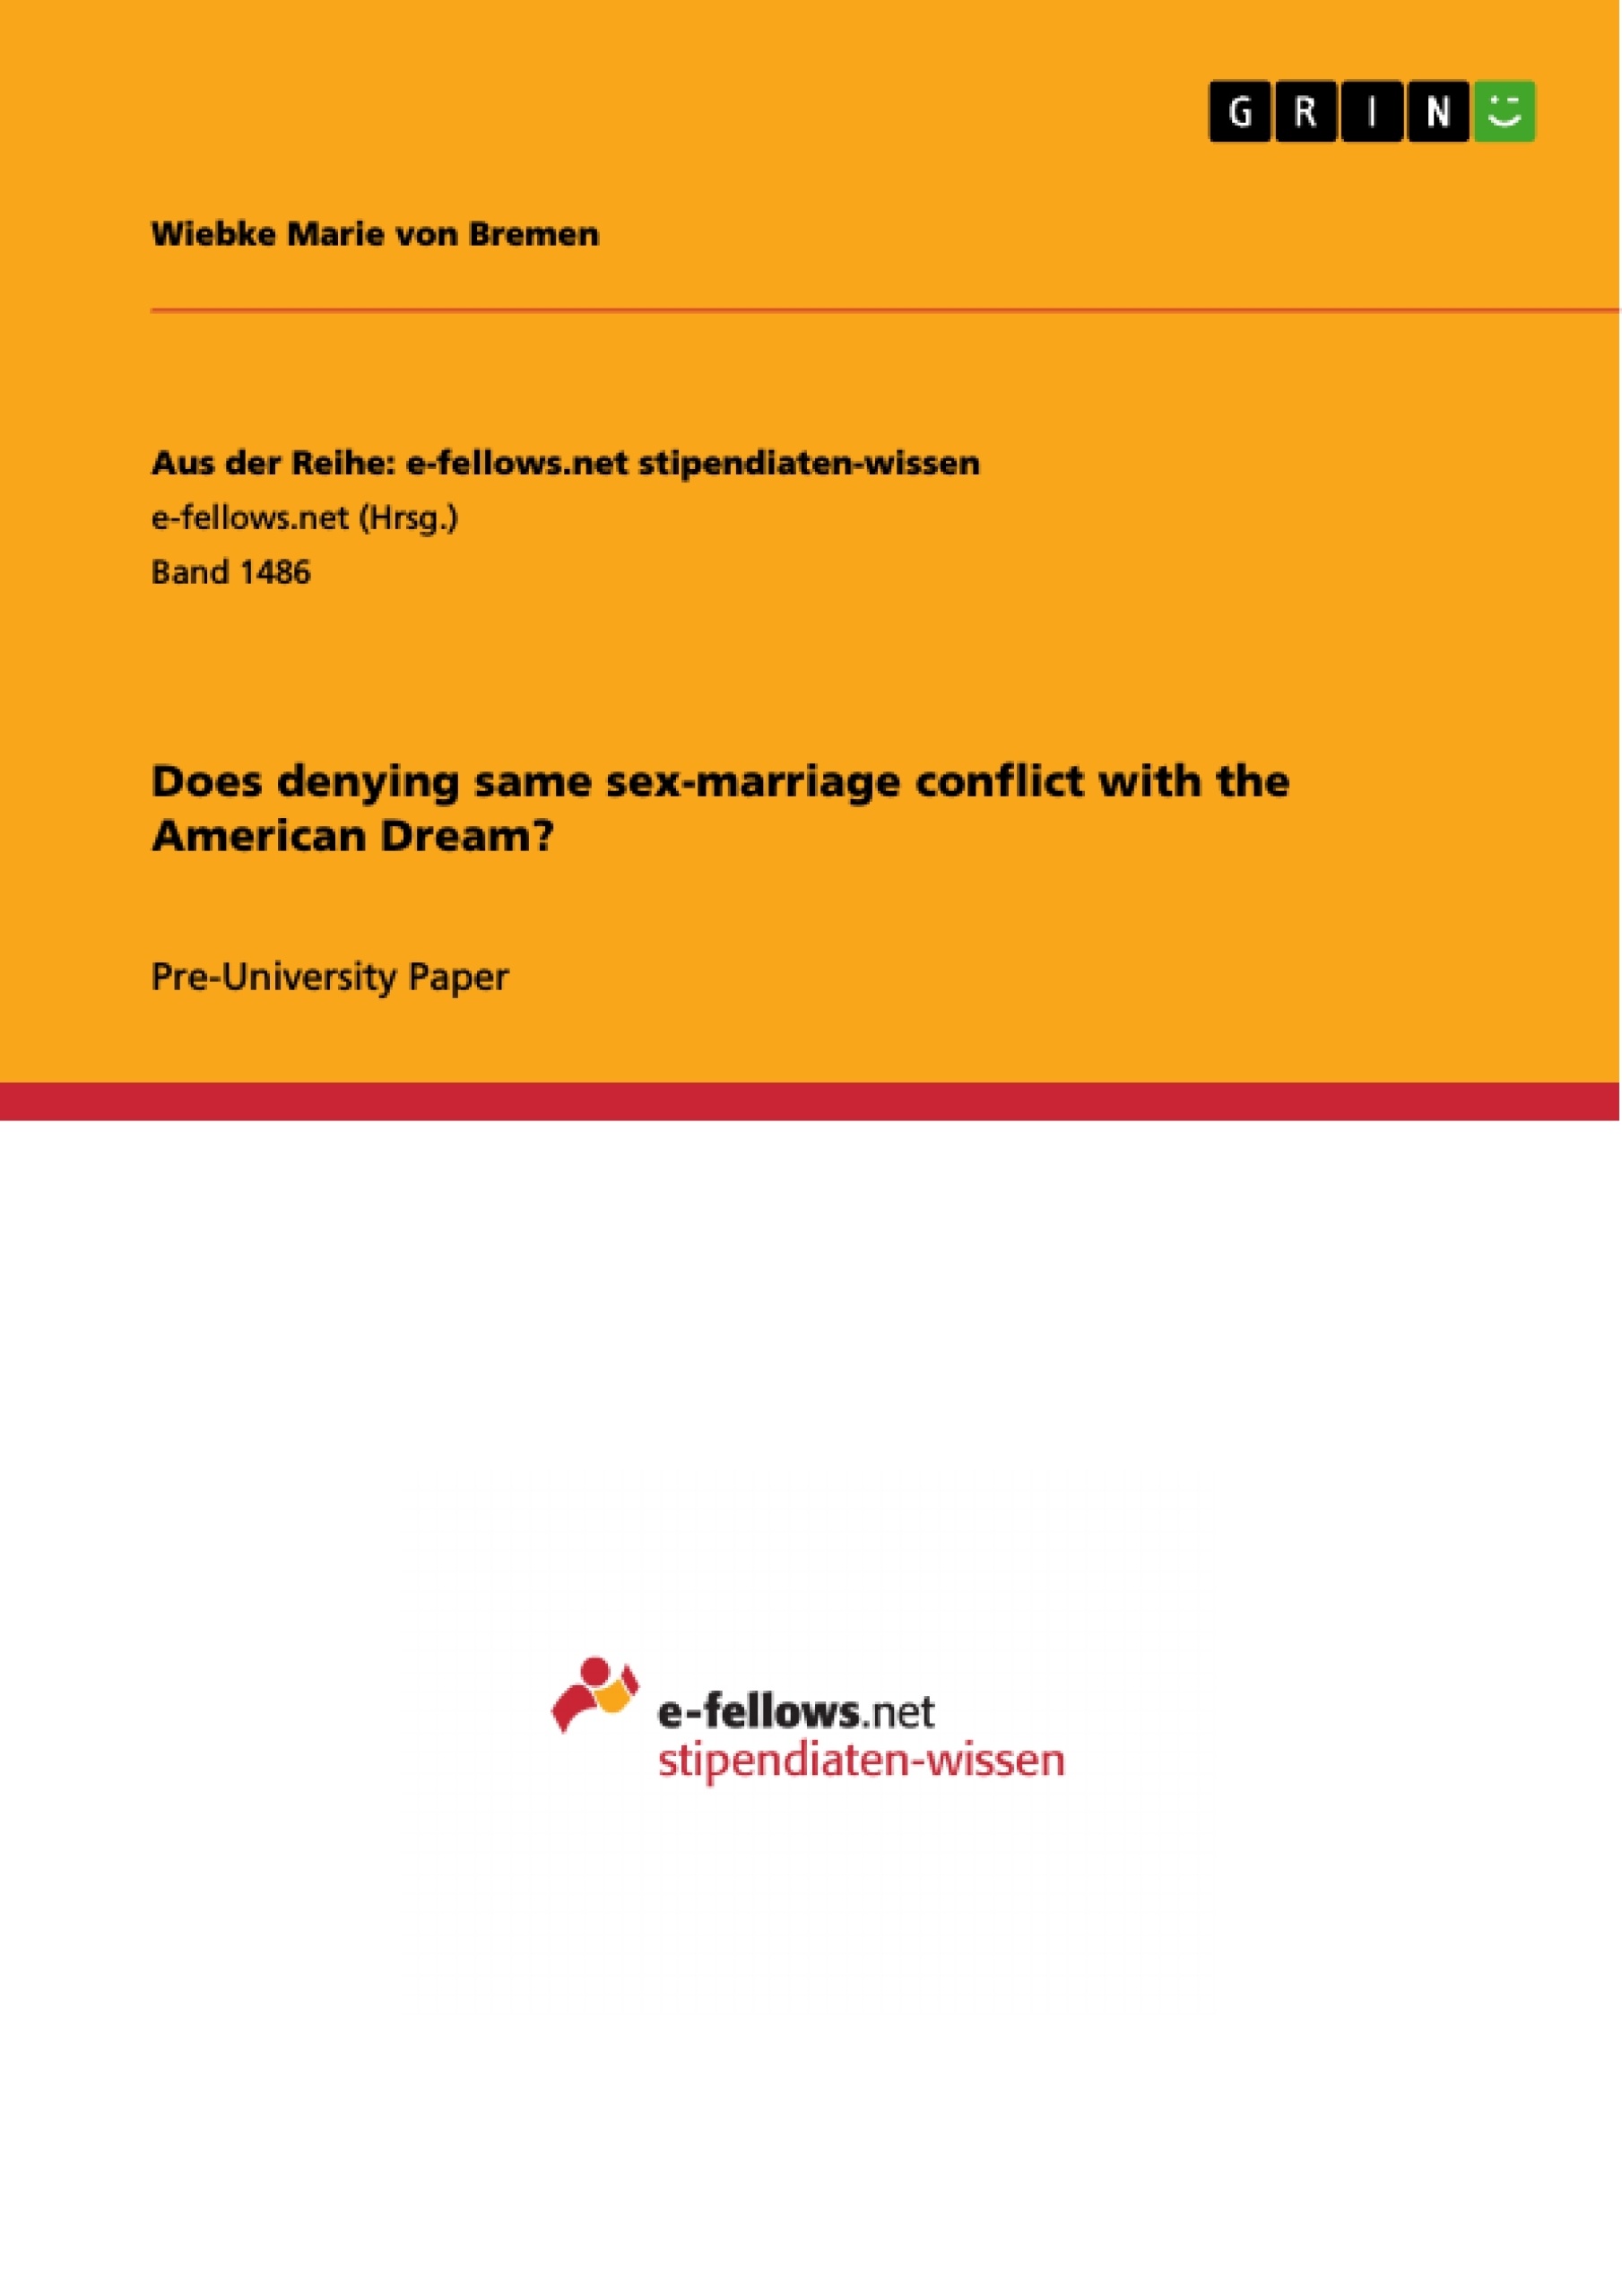 Title: Does denying same sex-marriage conflict with the American Dream?